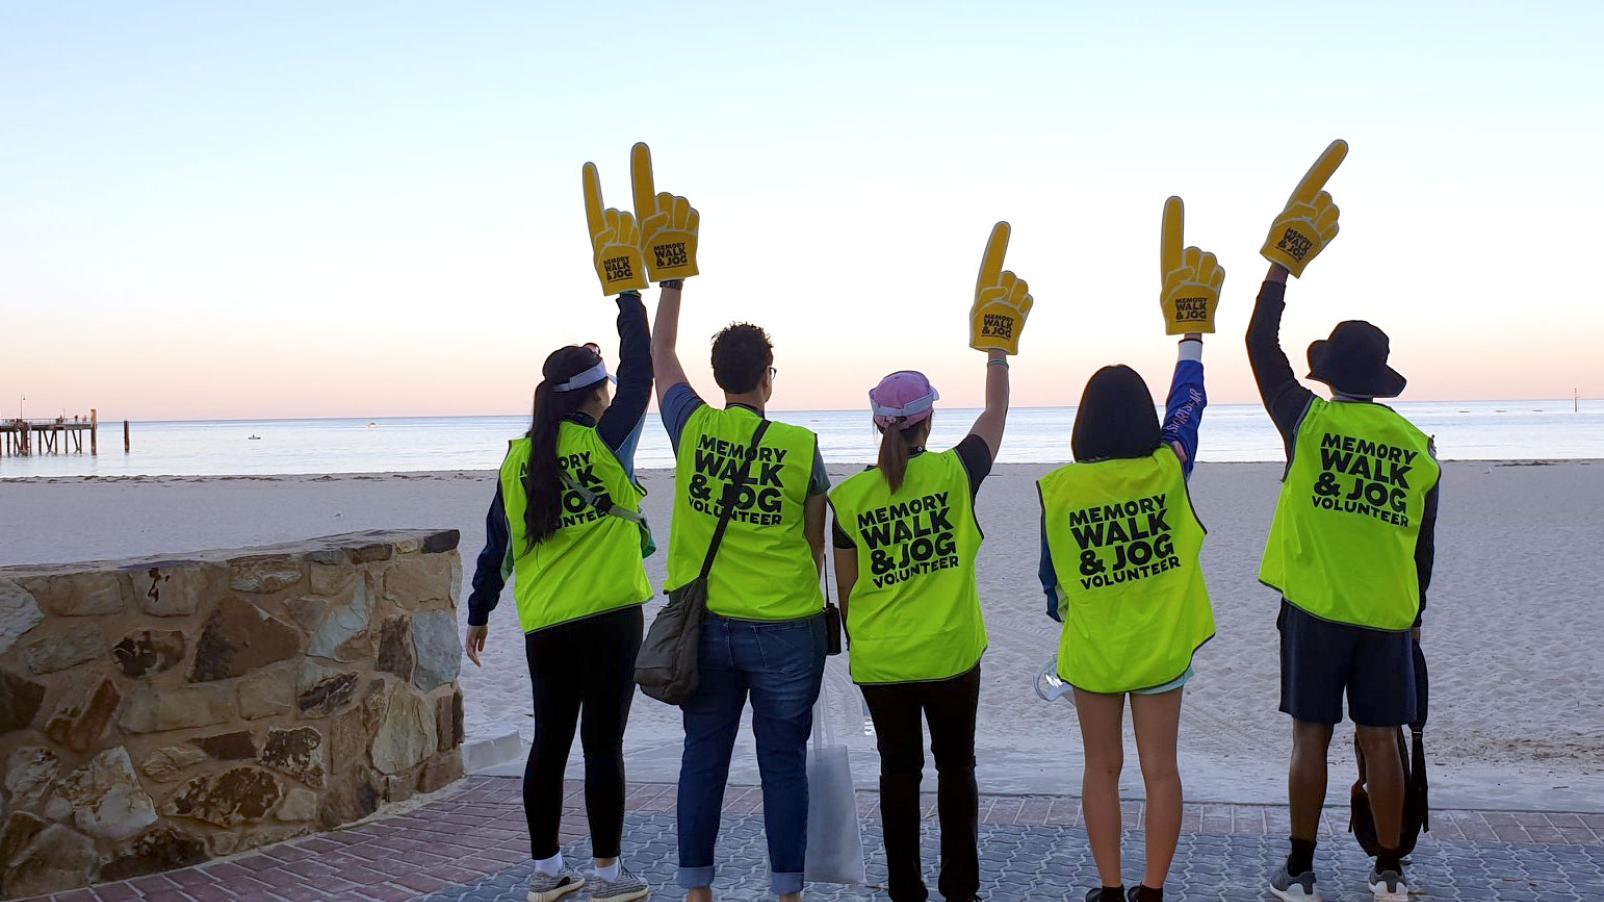 Four people with high visibility yellow vests facing away from the camera, on a beach with large foam fingers raised above their heads